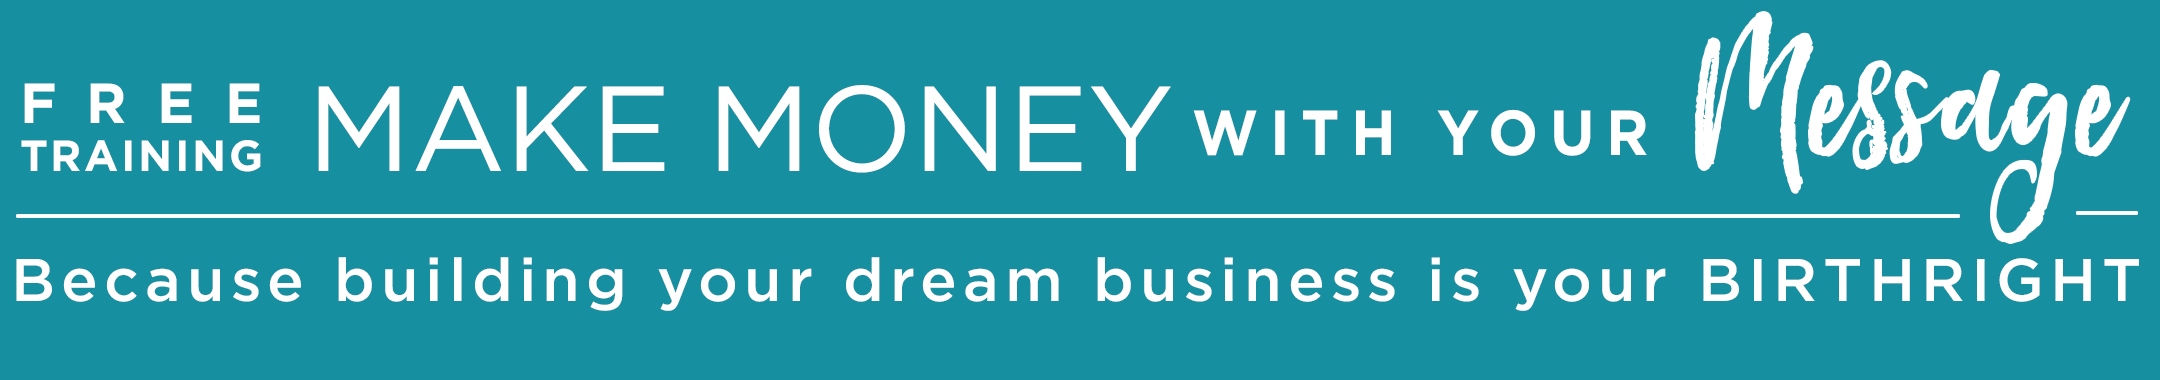 Free Training: Make Money with your Message because building your dream business is your BIRTHRIGHT